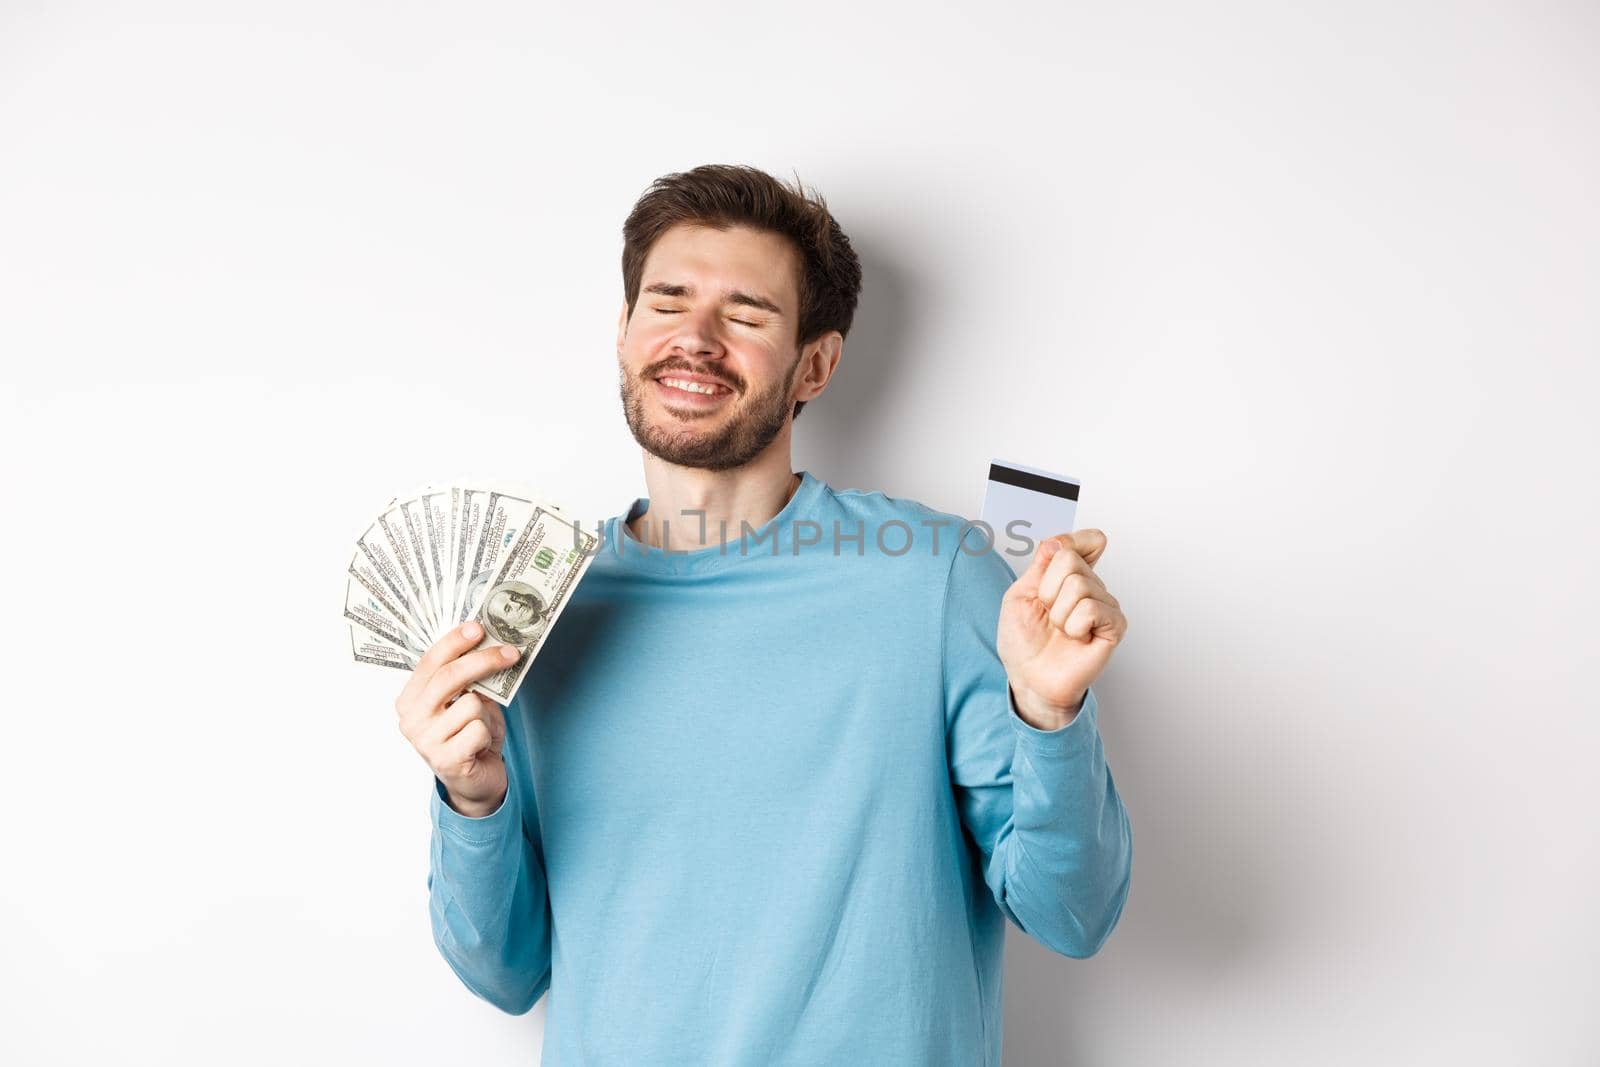 Cheerful guy celebrating salary, dancing with plastic credit card and money, smiling satisfied, standing over white background.